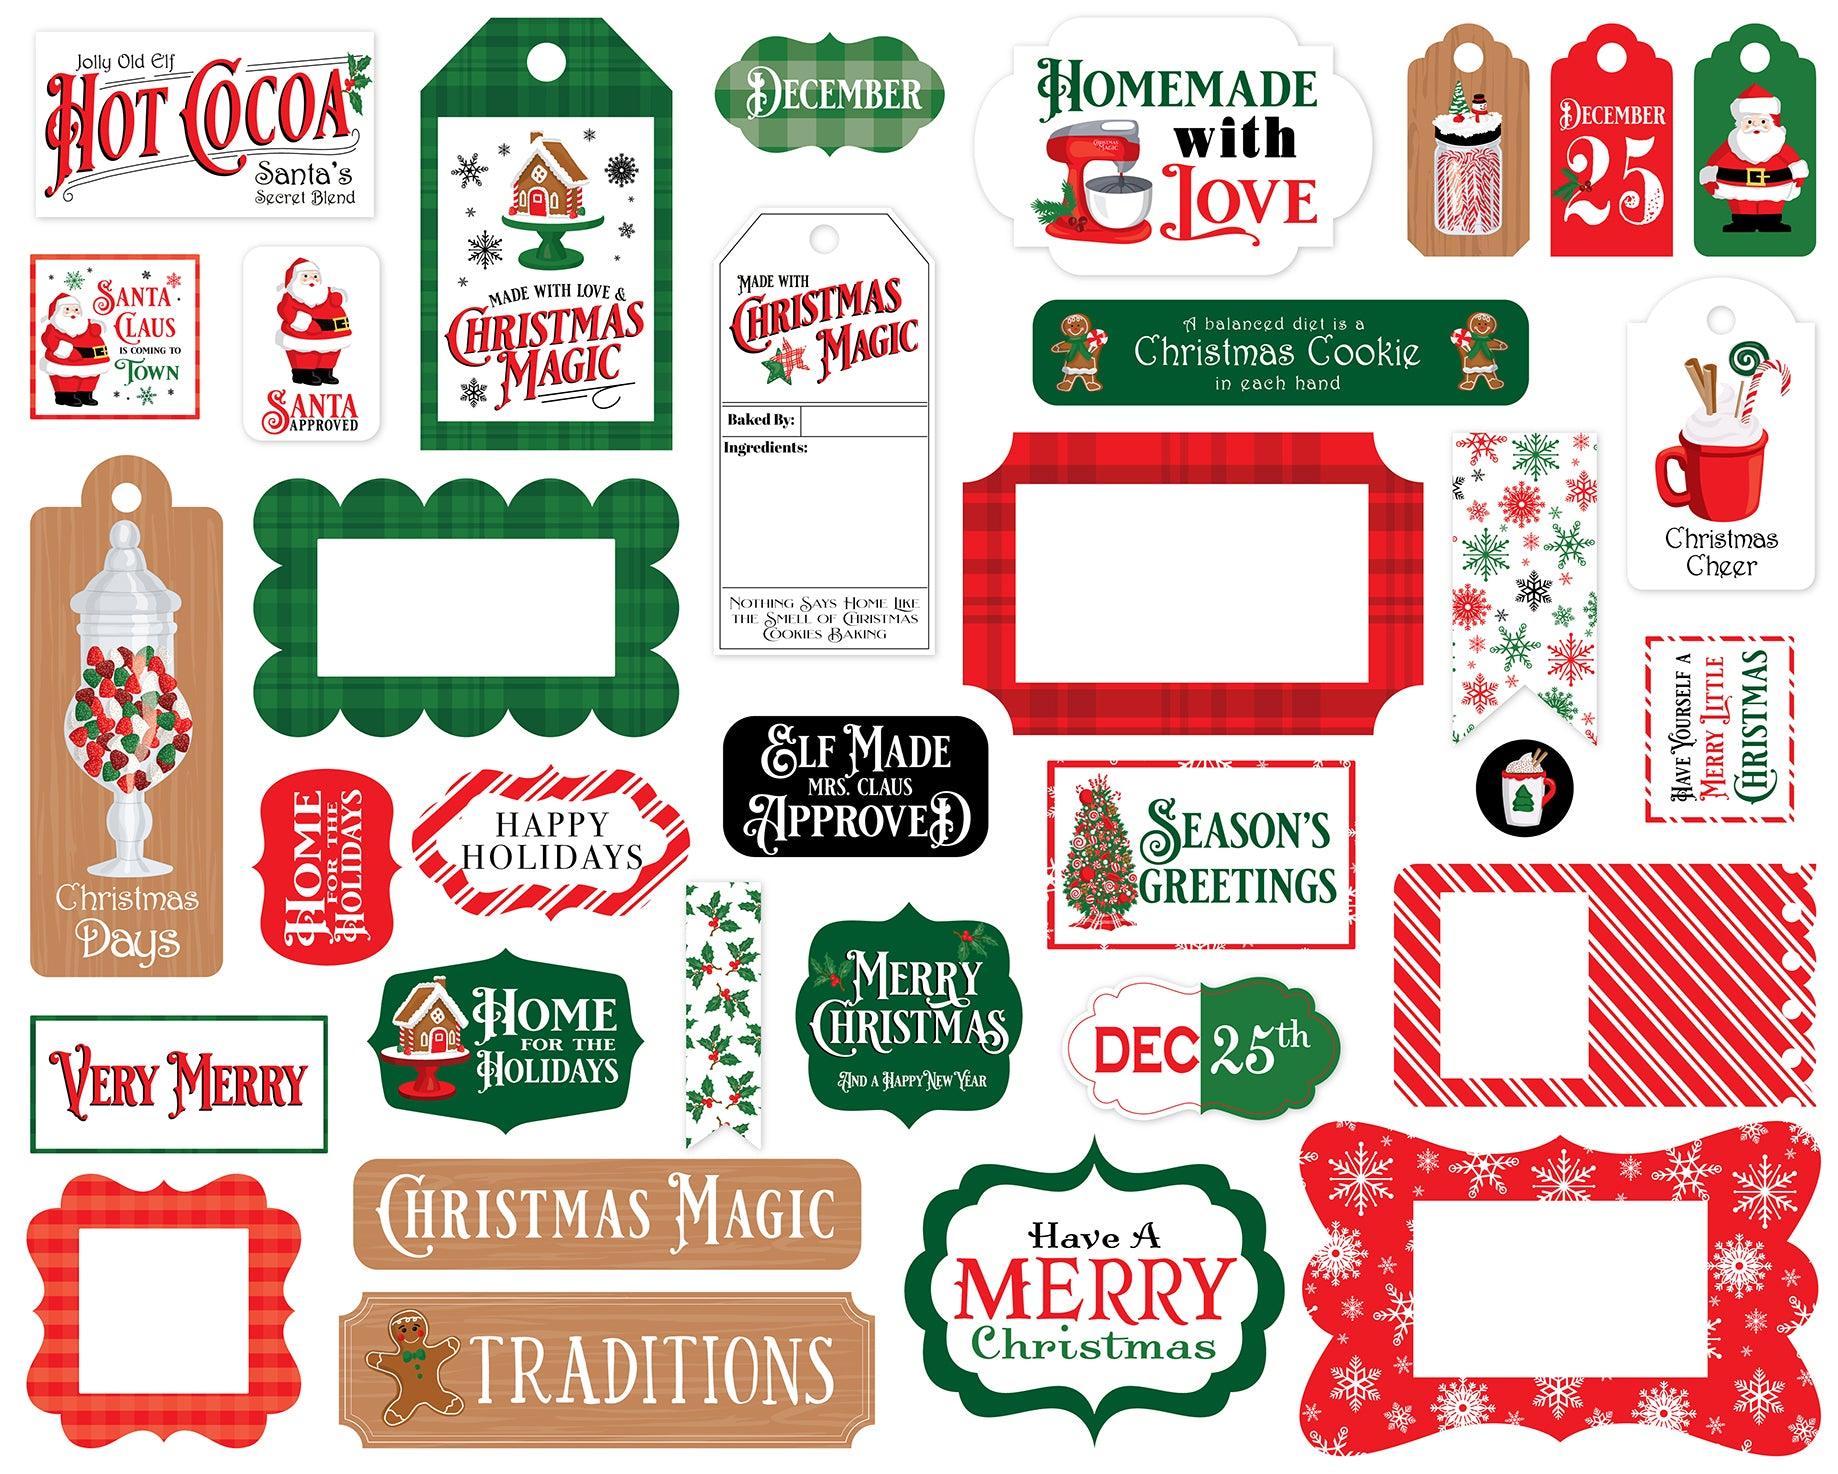 Christmas Cheer Collection 5 x 5 Scrapbook Tags & Frames Die Cuts by Carta Bella - Scrapbook Supply Companies